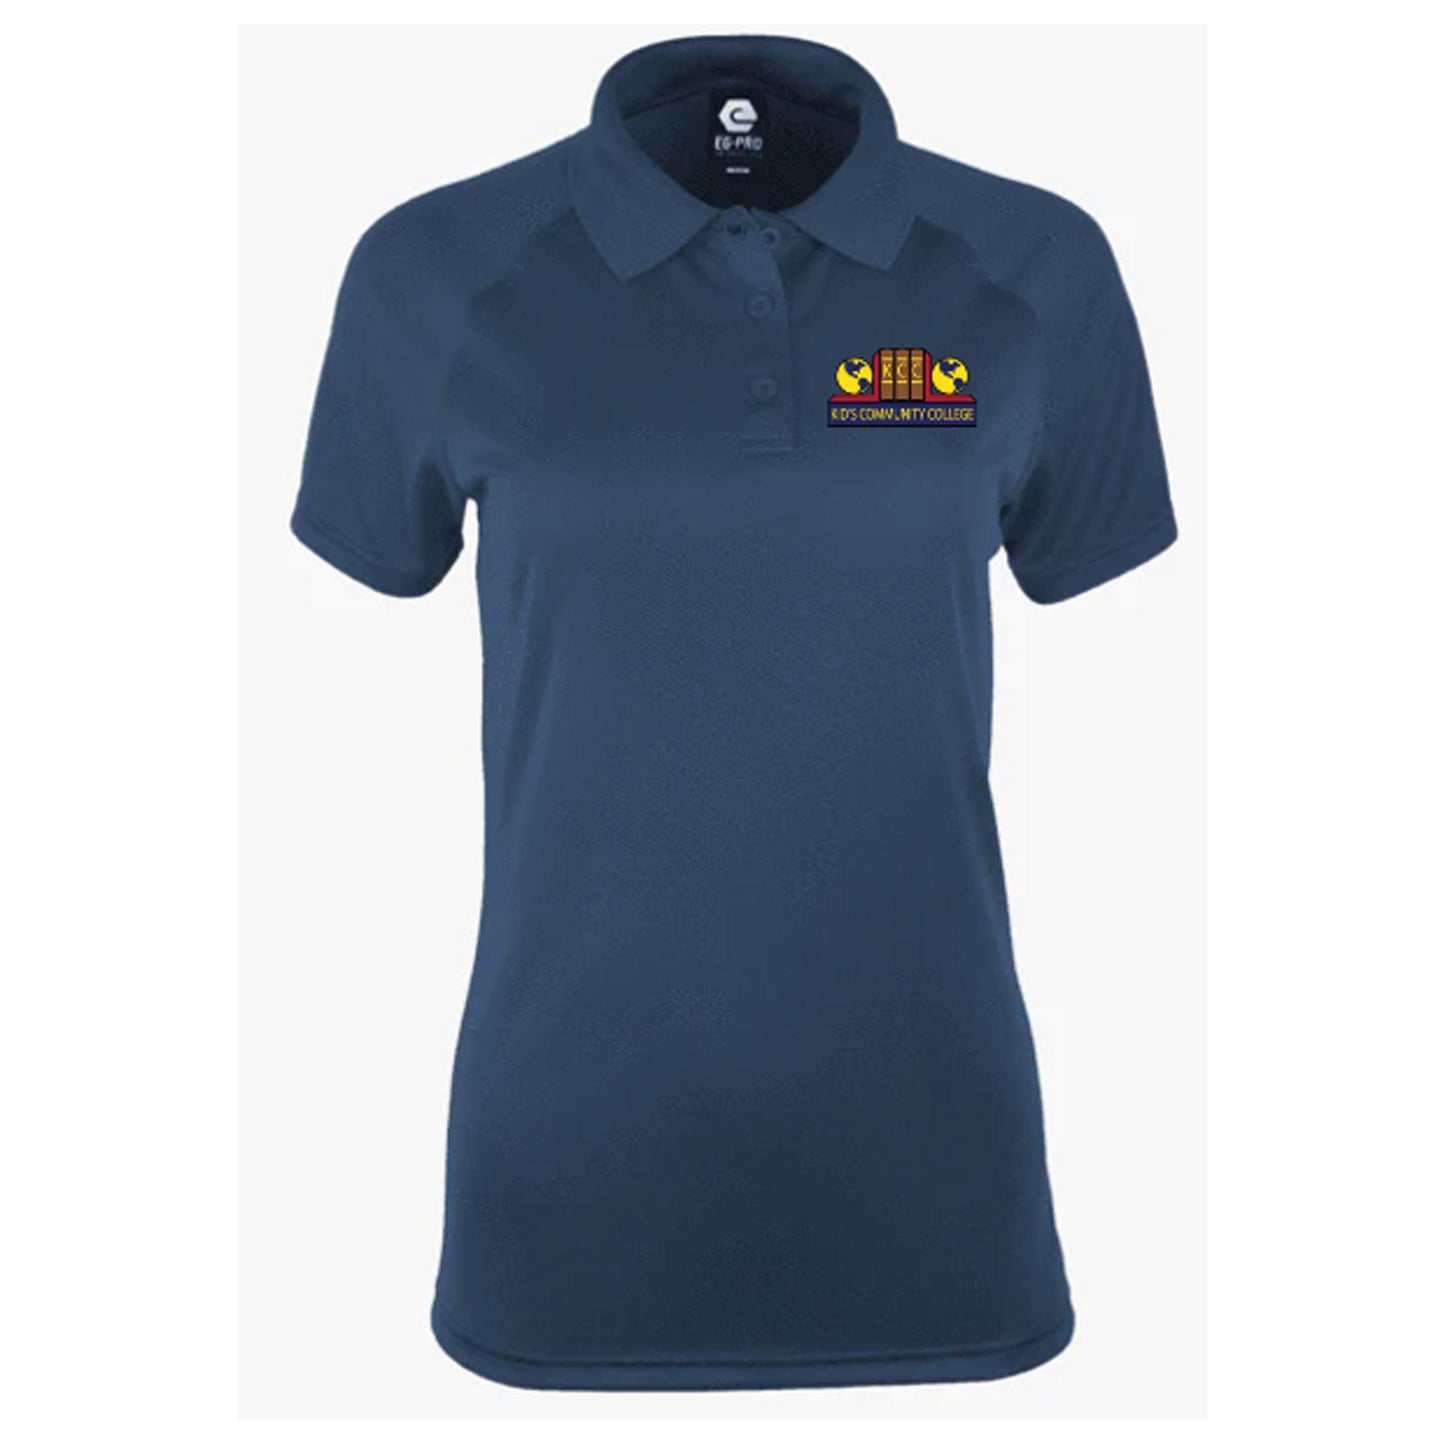 KCCSL Elementary Juniors Moisture Wicking Polo - SPECIAL ORDER!